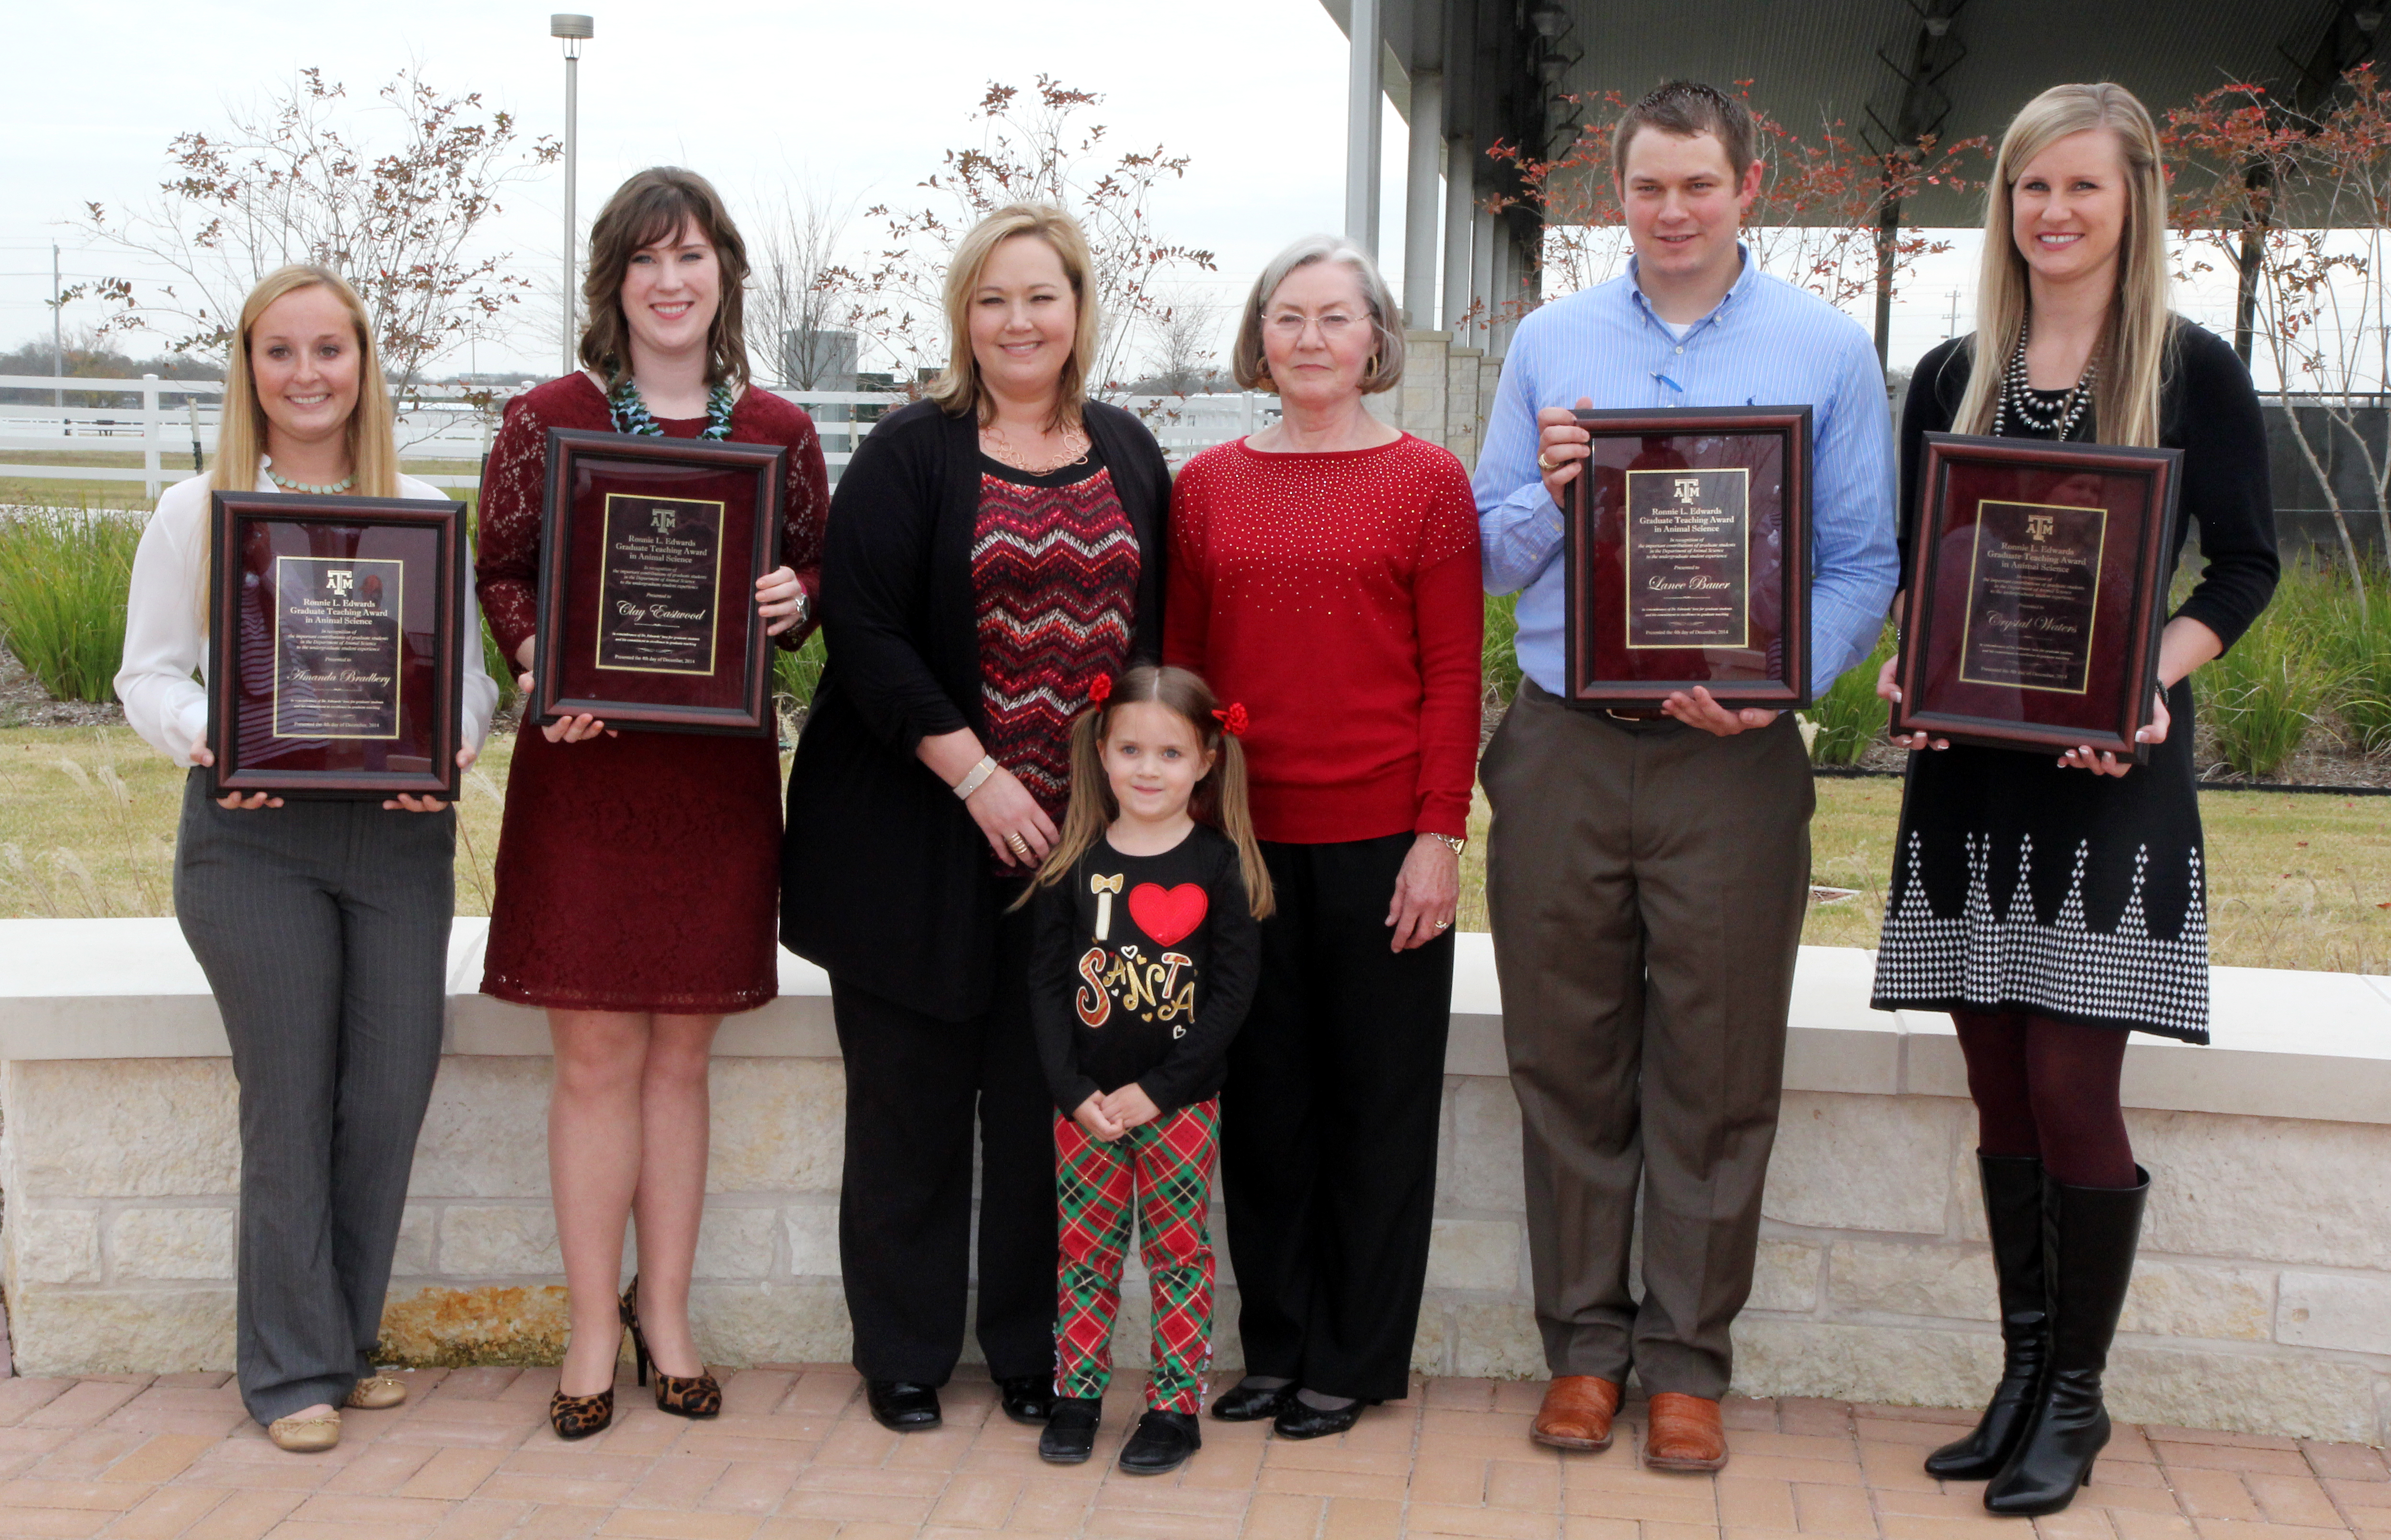 Group photo of Edwards family and award winners.